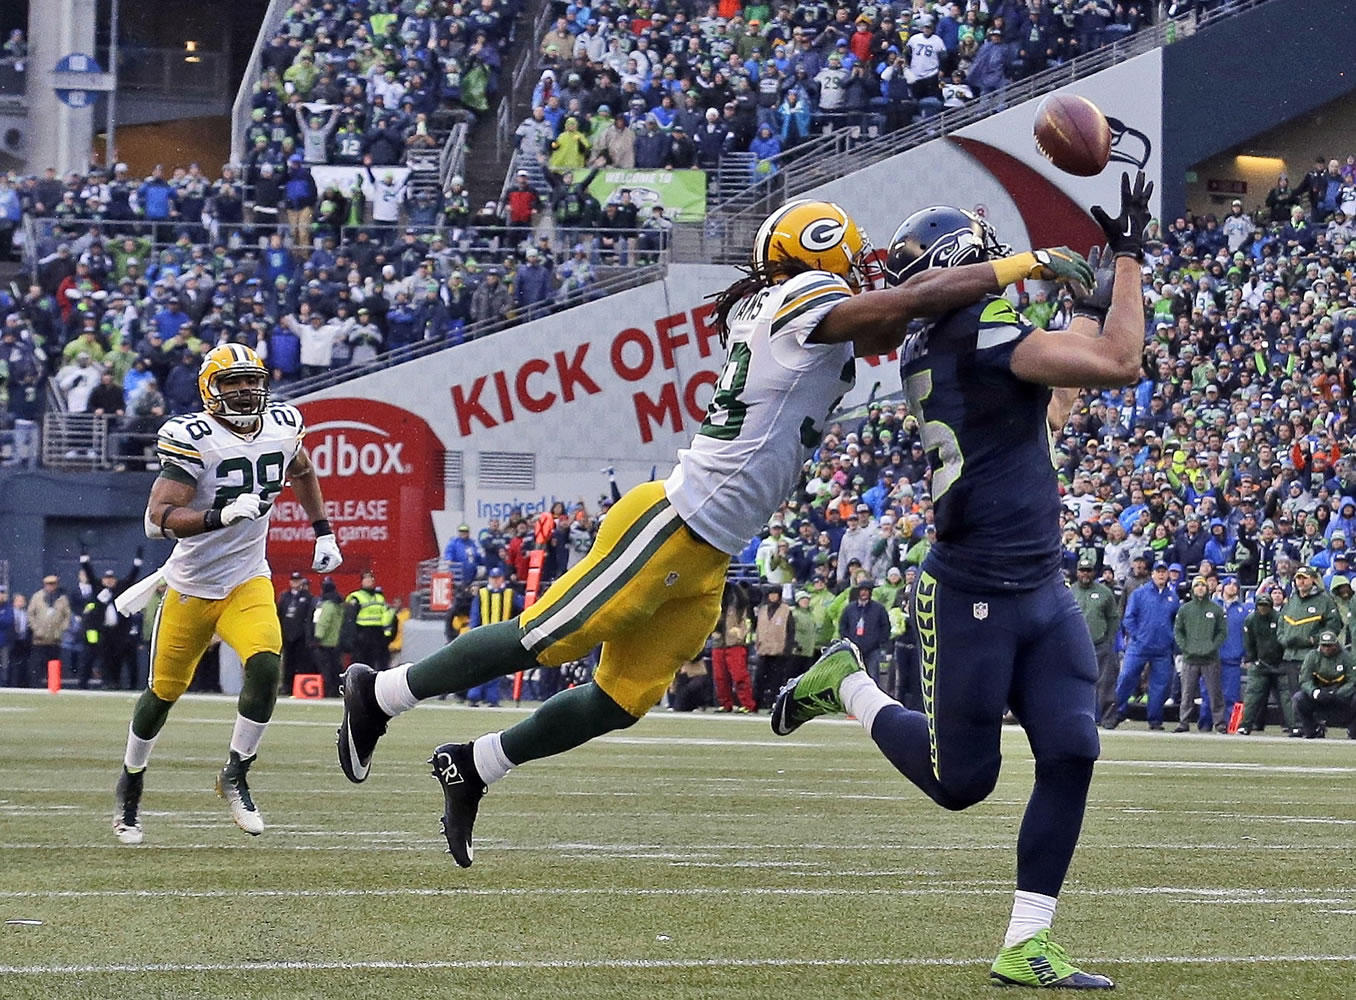 Seattle Seahawks' Jermaine Kearse, right, catches the game-winning touchdown pass during overtime of the NFC championship NFL football game against the Green Bay Packers in Seattle.